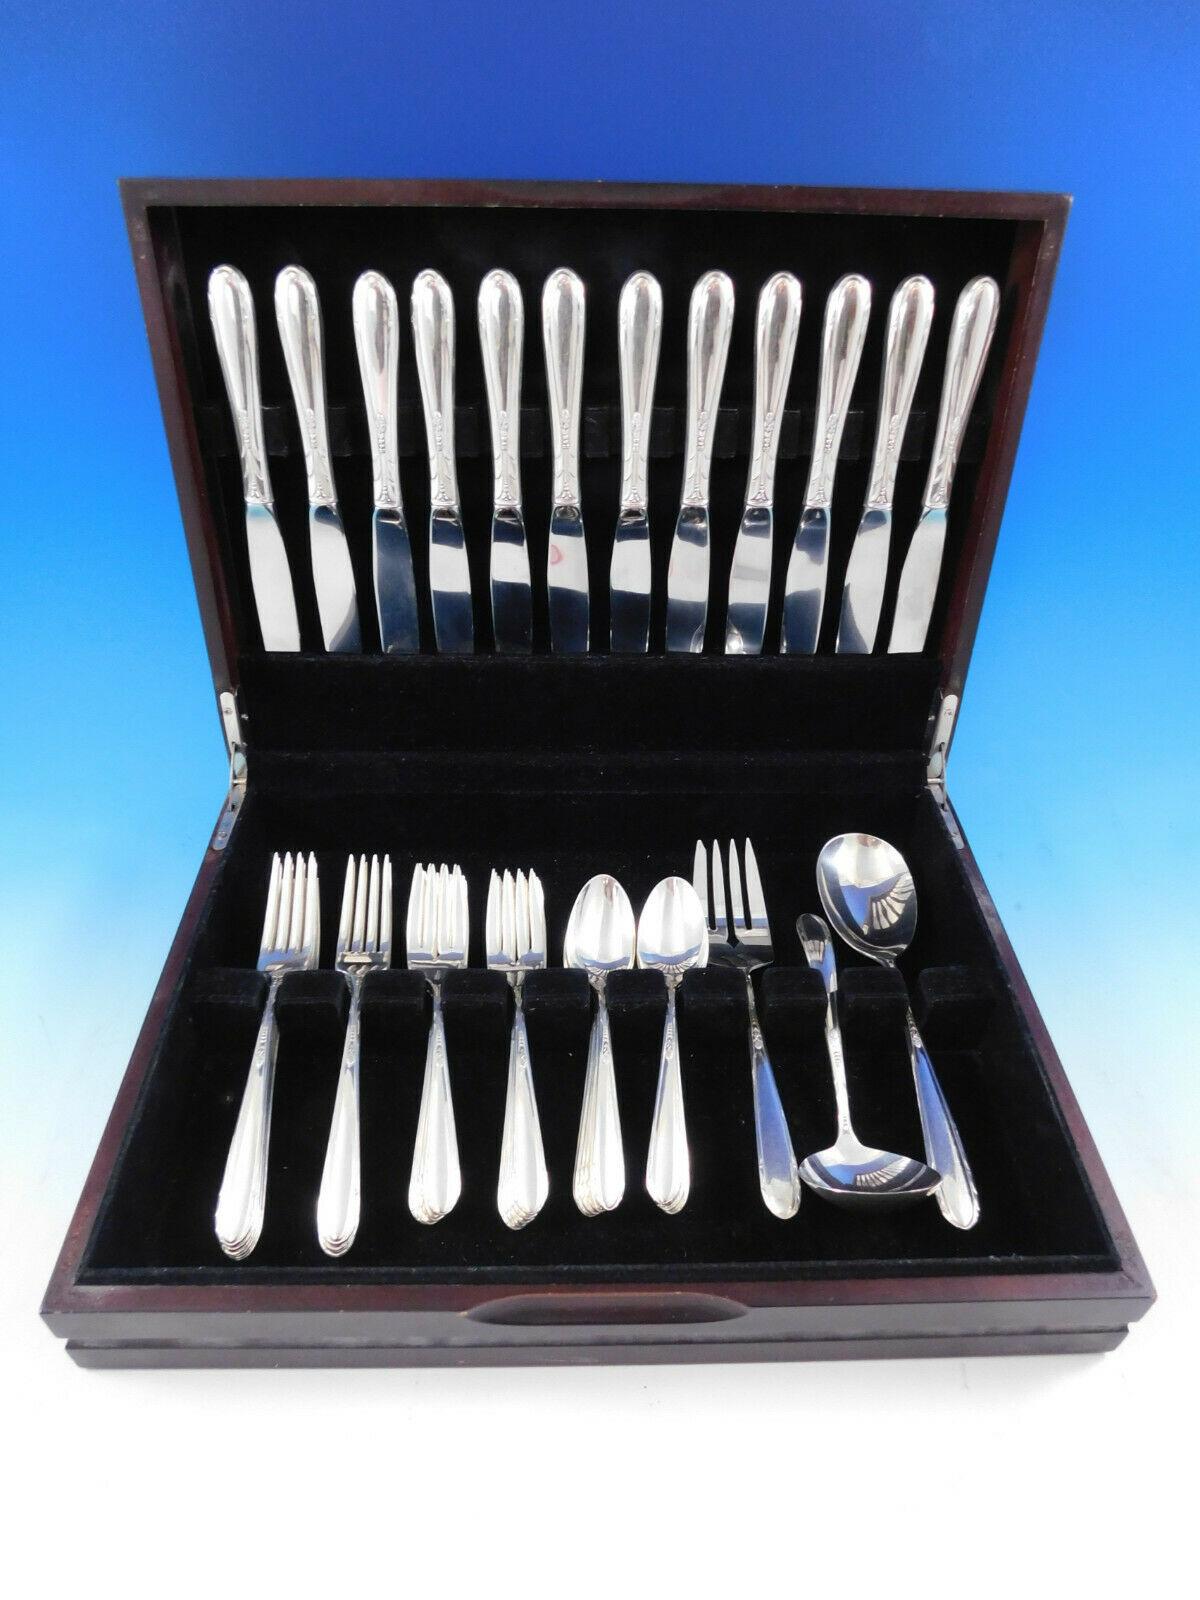 Heiress by Oneida sterling silver flatware set - 51 pieces. This set includes:

12 knives, 9 1/4